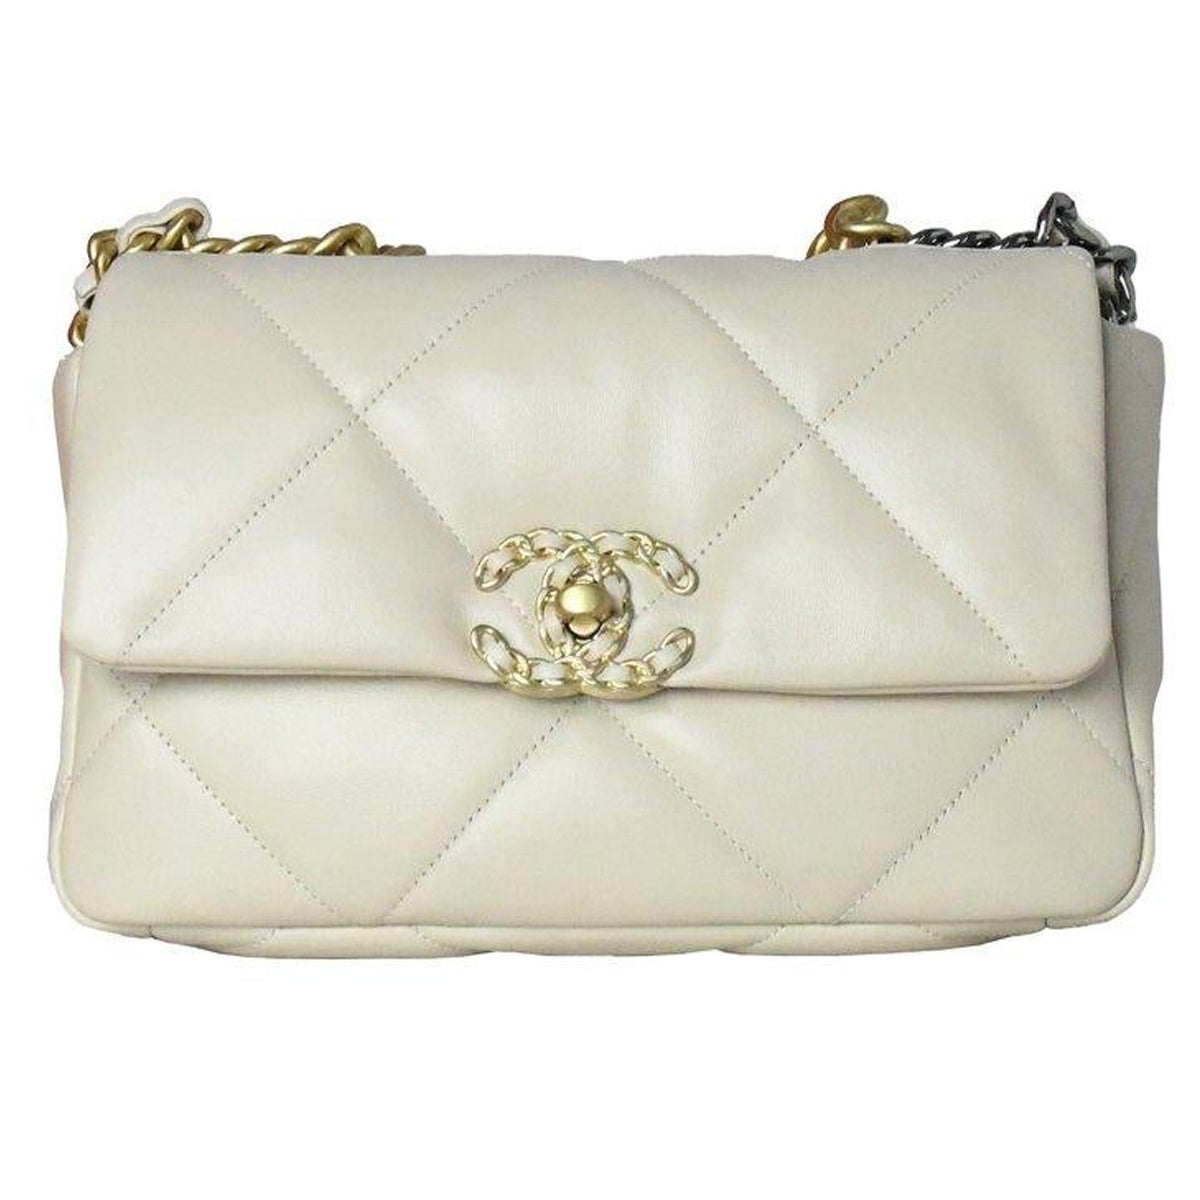 Chanel 19 Small Bag Beige For Sale